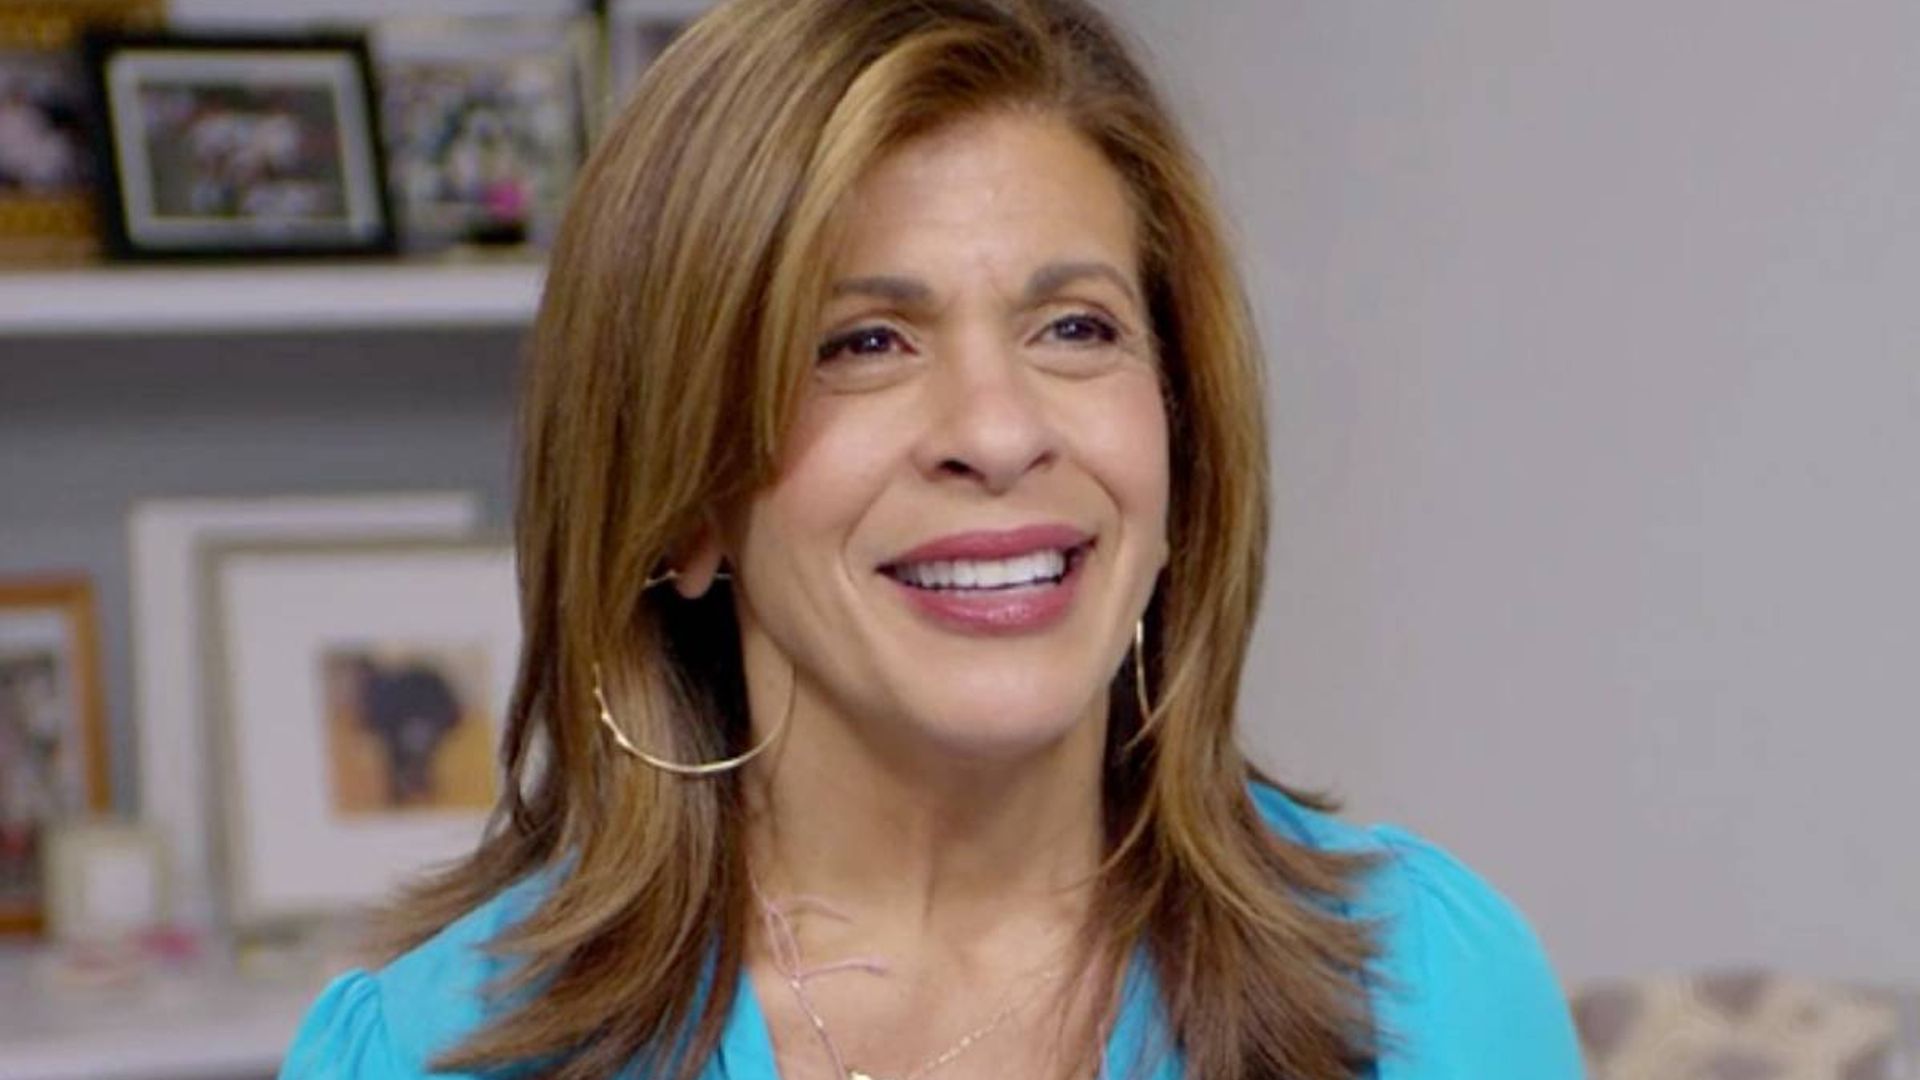 Hoda Kotb wows with unexpected hair transformation in before-and-after video